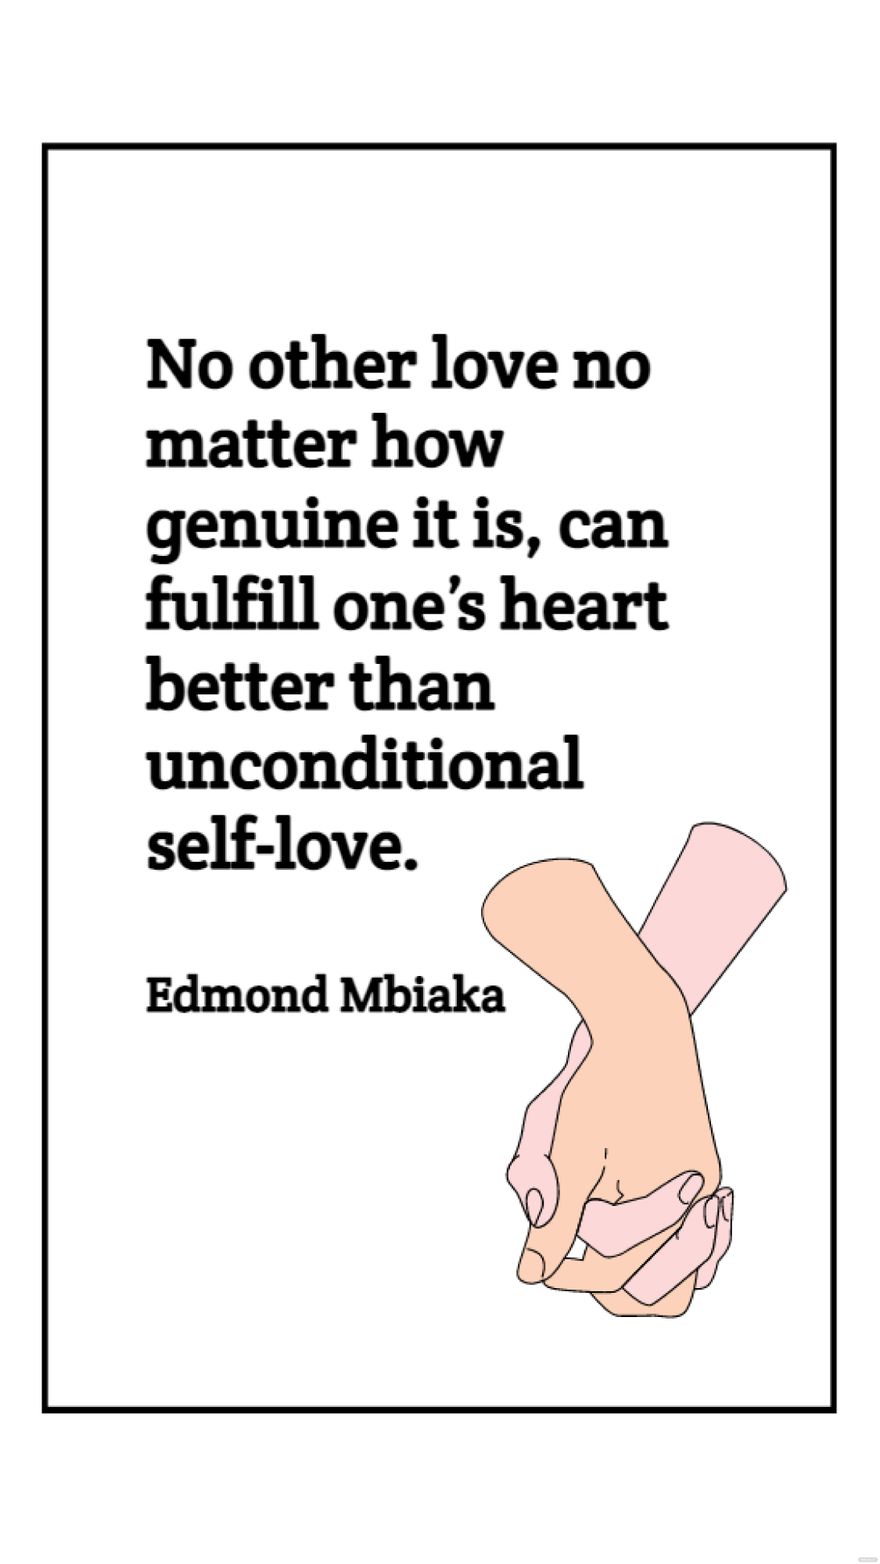 Edmond Mbiaka - No other love no matter how genuine it is, can fulfill one’s heart better than unconditional self-love.